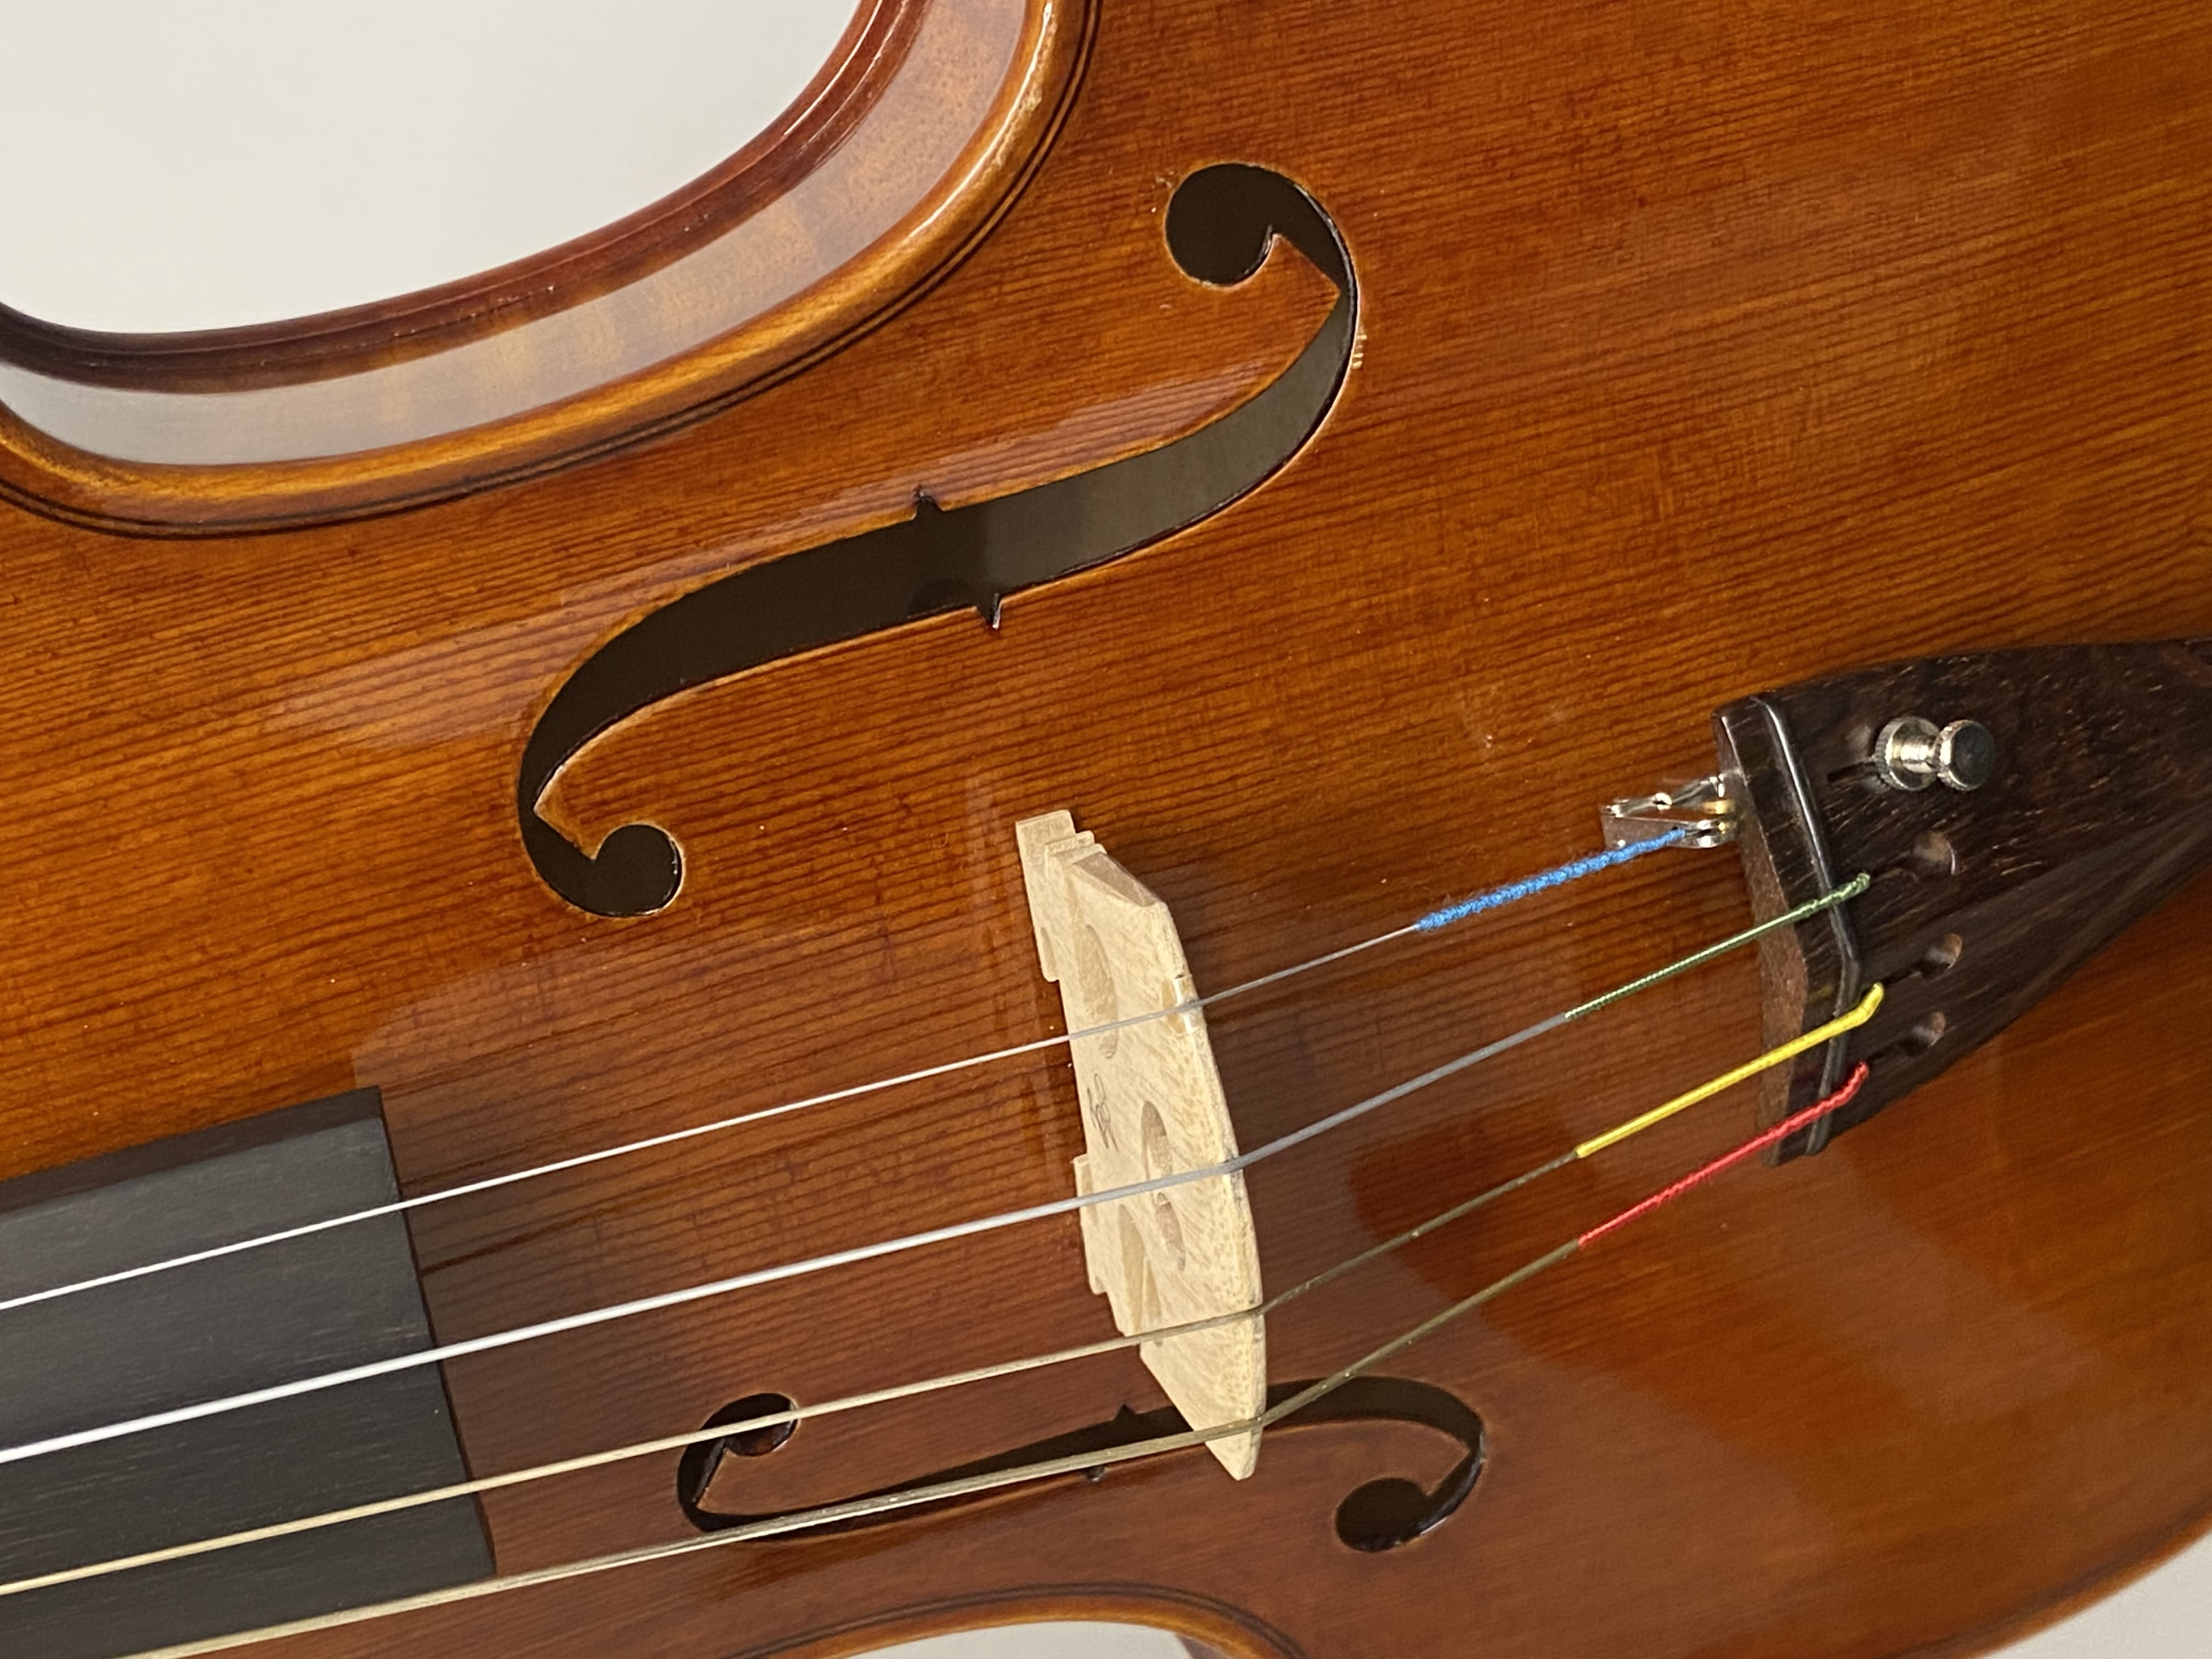 【Viola】Aubert Lutherie #Georges Michel（オベール・リューテリエ）